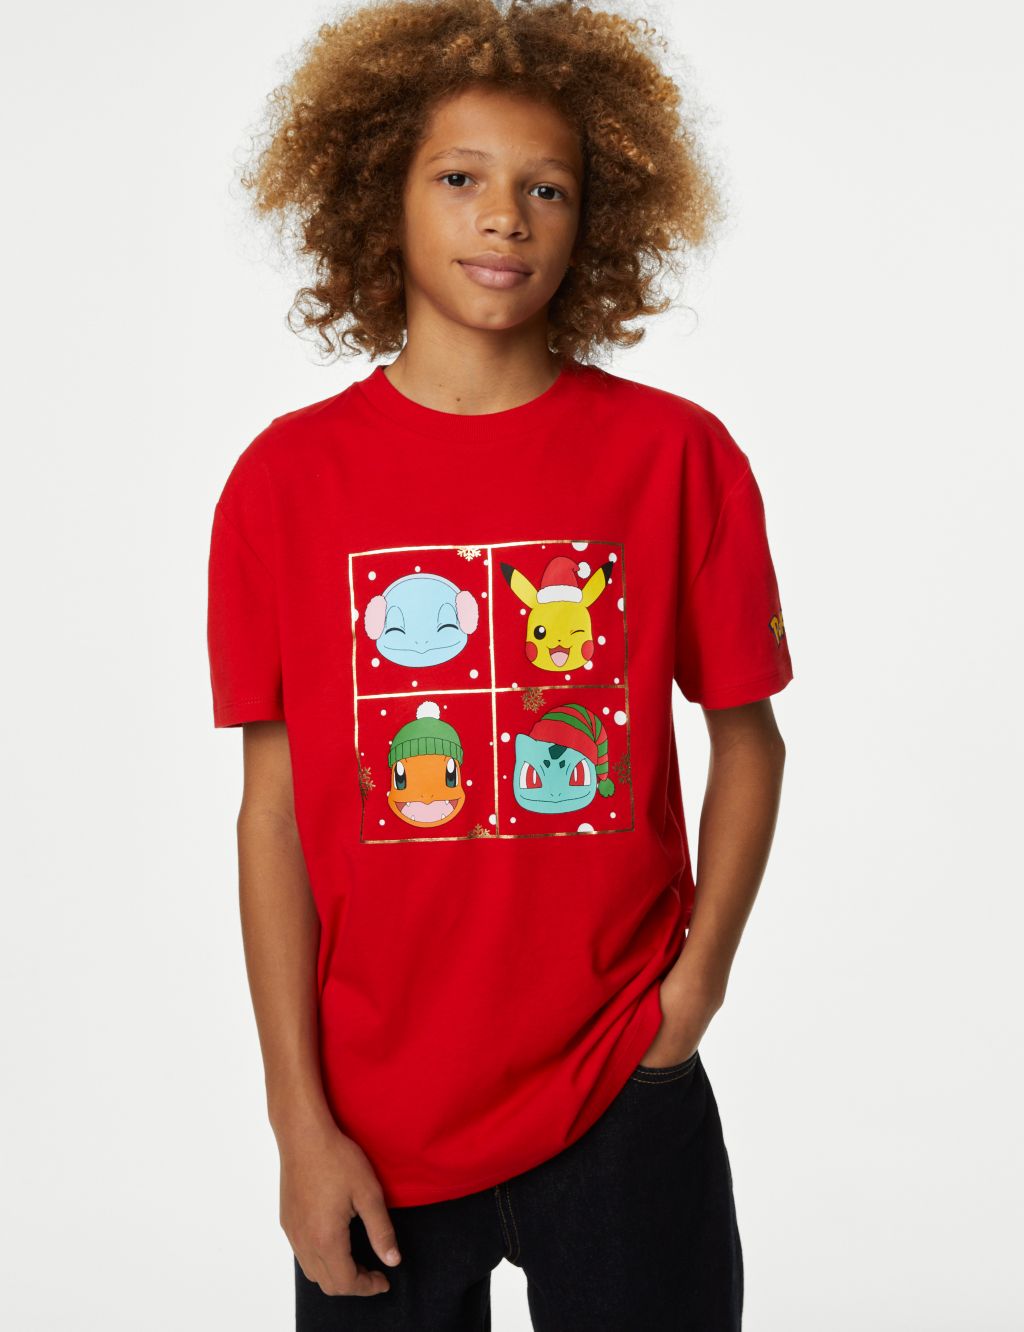 red tie tux tshirts - Google Search  Tuxedo card, Roblox t shirts, Red tux